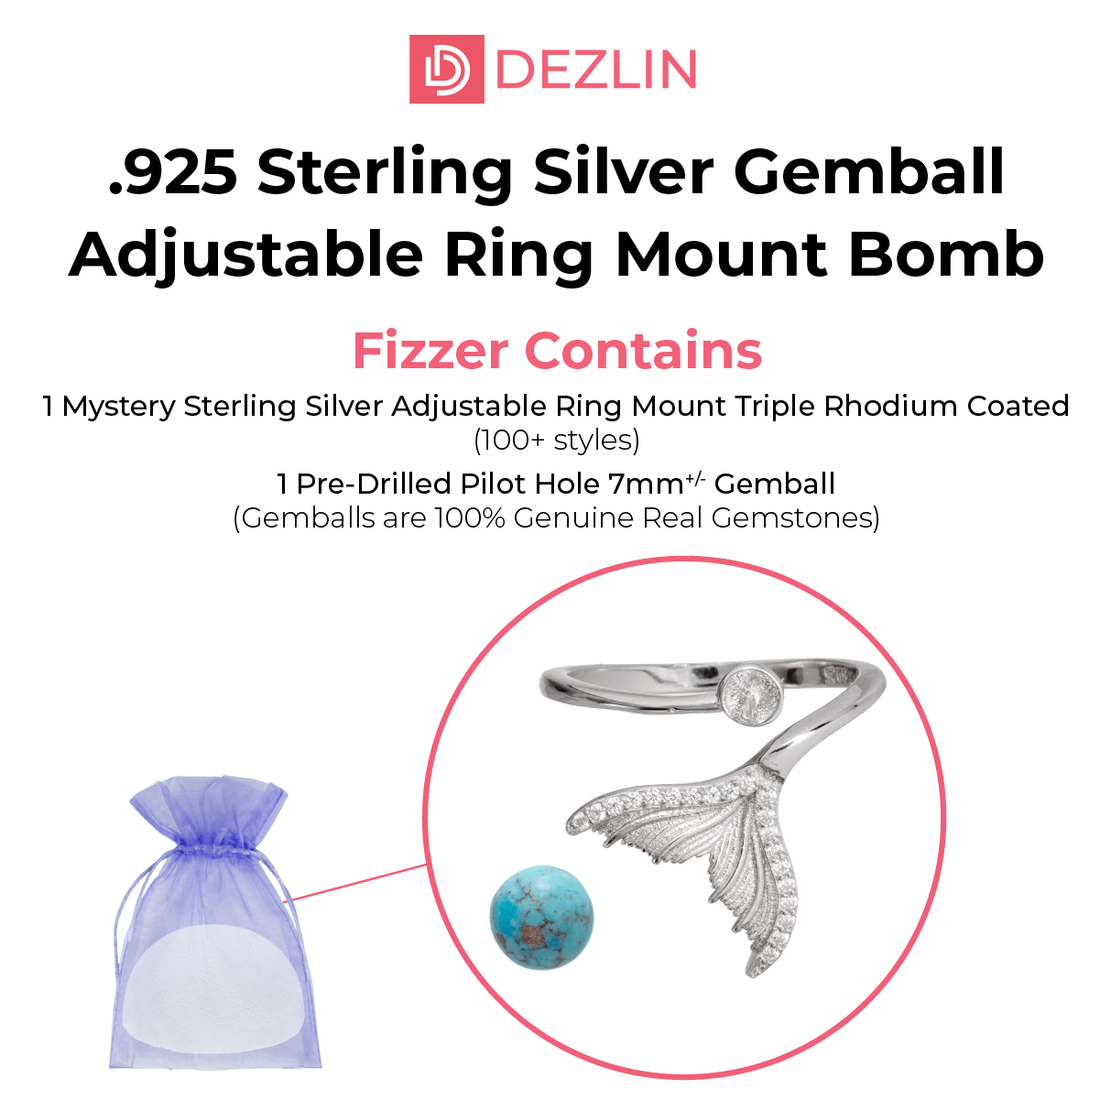 Ring Bomb - Gemball DIY Mount Adjustable Ring 925 Sterling Silver Rhodium Coated (100+ Styles)